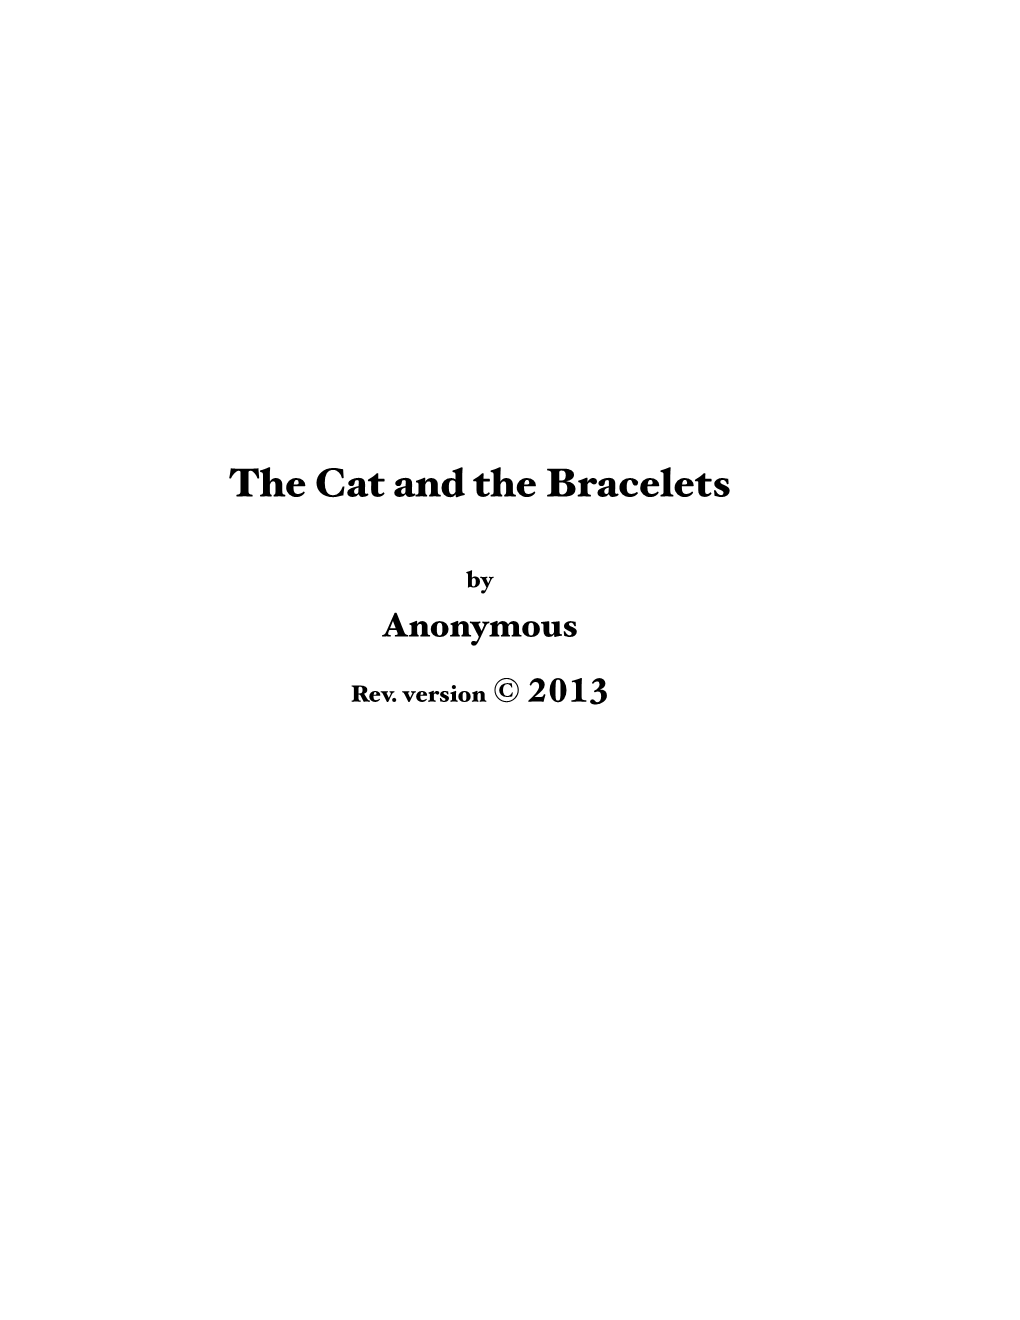 The Cat and the Bracelets